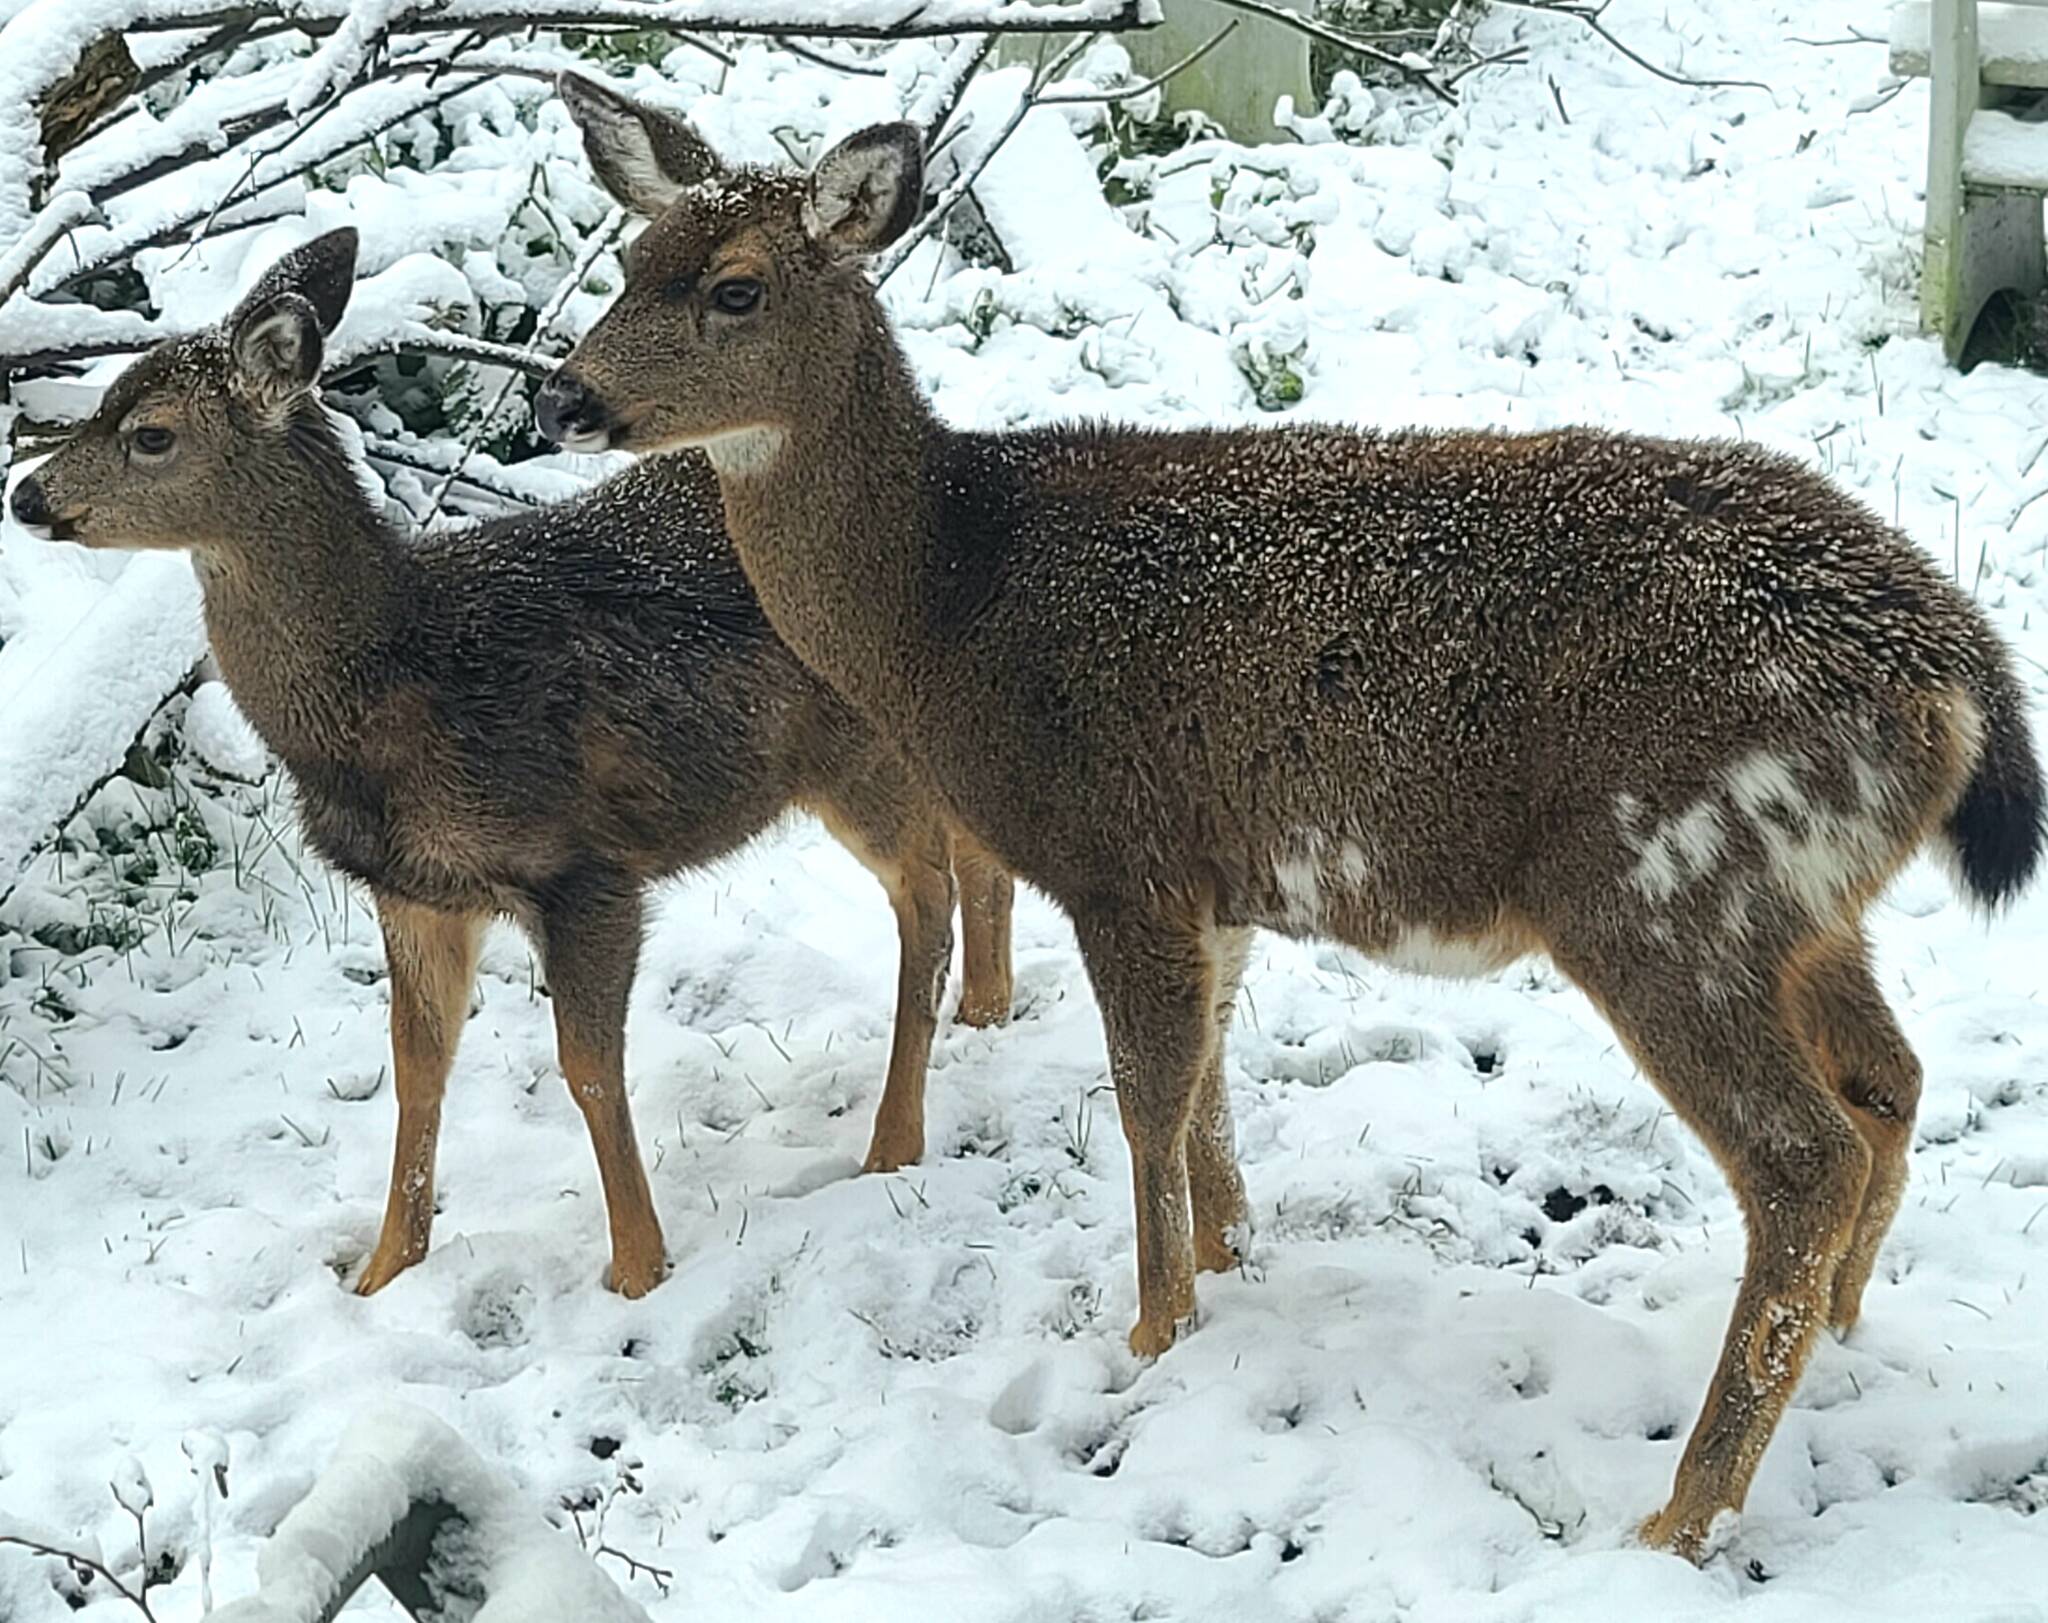 Photo by Diane Jhueck
A pair of black-tailed deer ventures through the falling snow Sunday on South Whidbey.